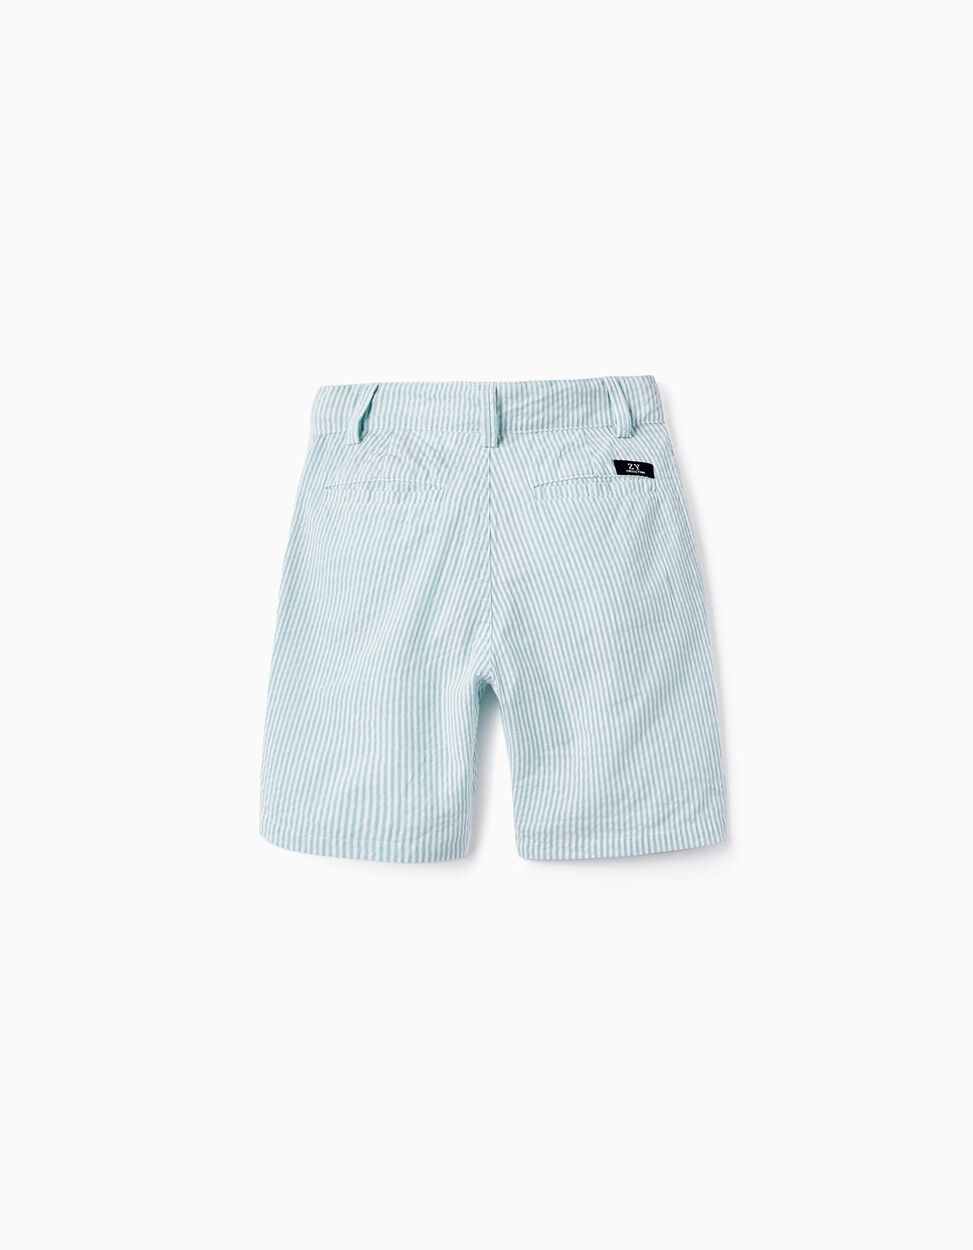 Buy Online Striped Chino Shorts for Boys, White/Green